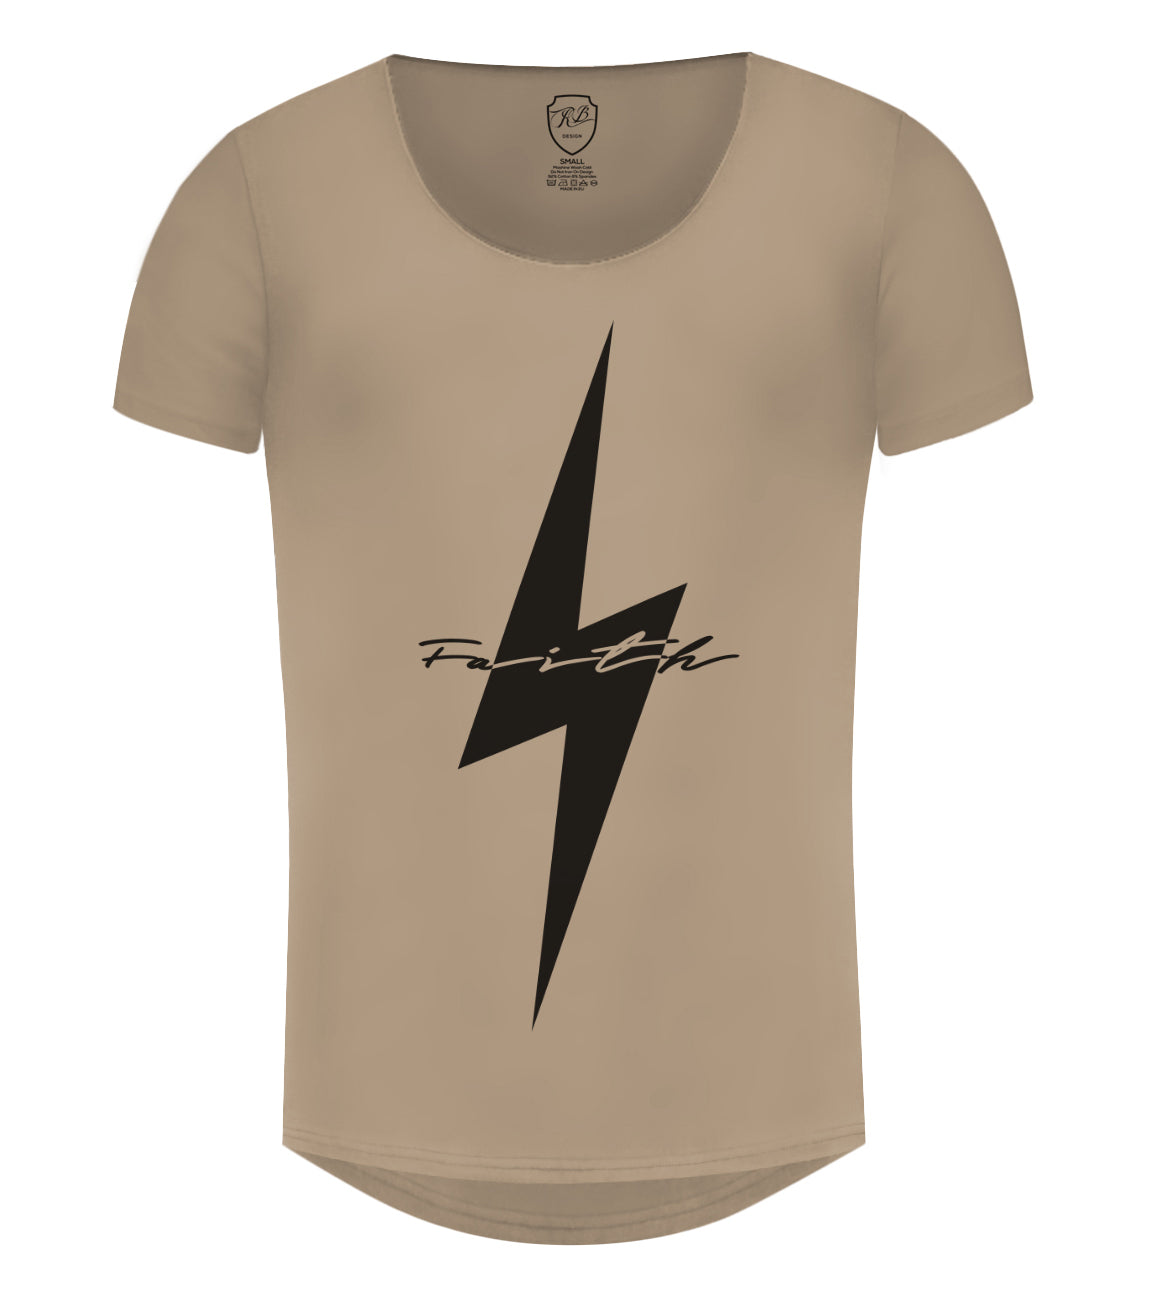 Cool Mens Casual T-shirt Flash Slim Fit Graphic Tee "Faith"/ Color Option / MD897